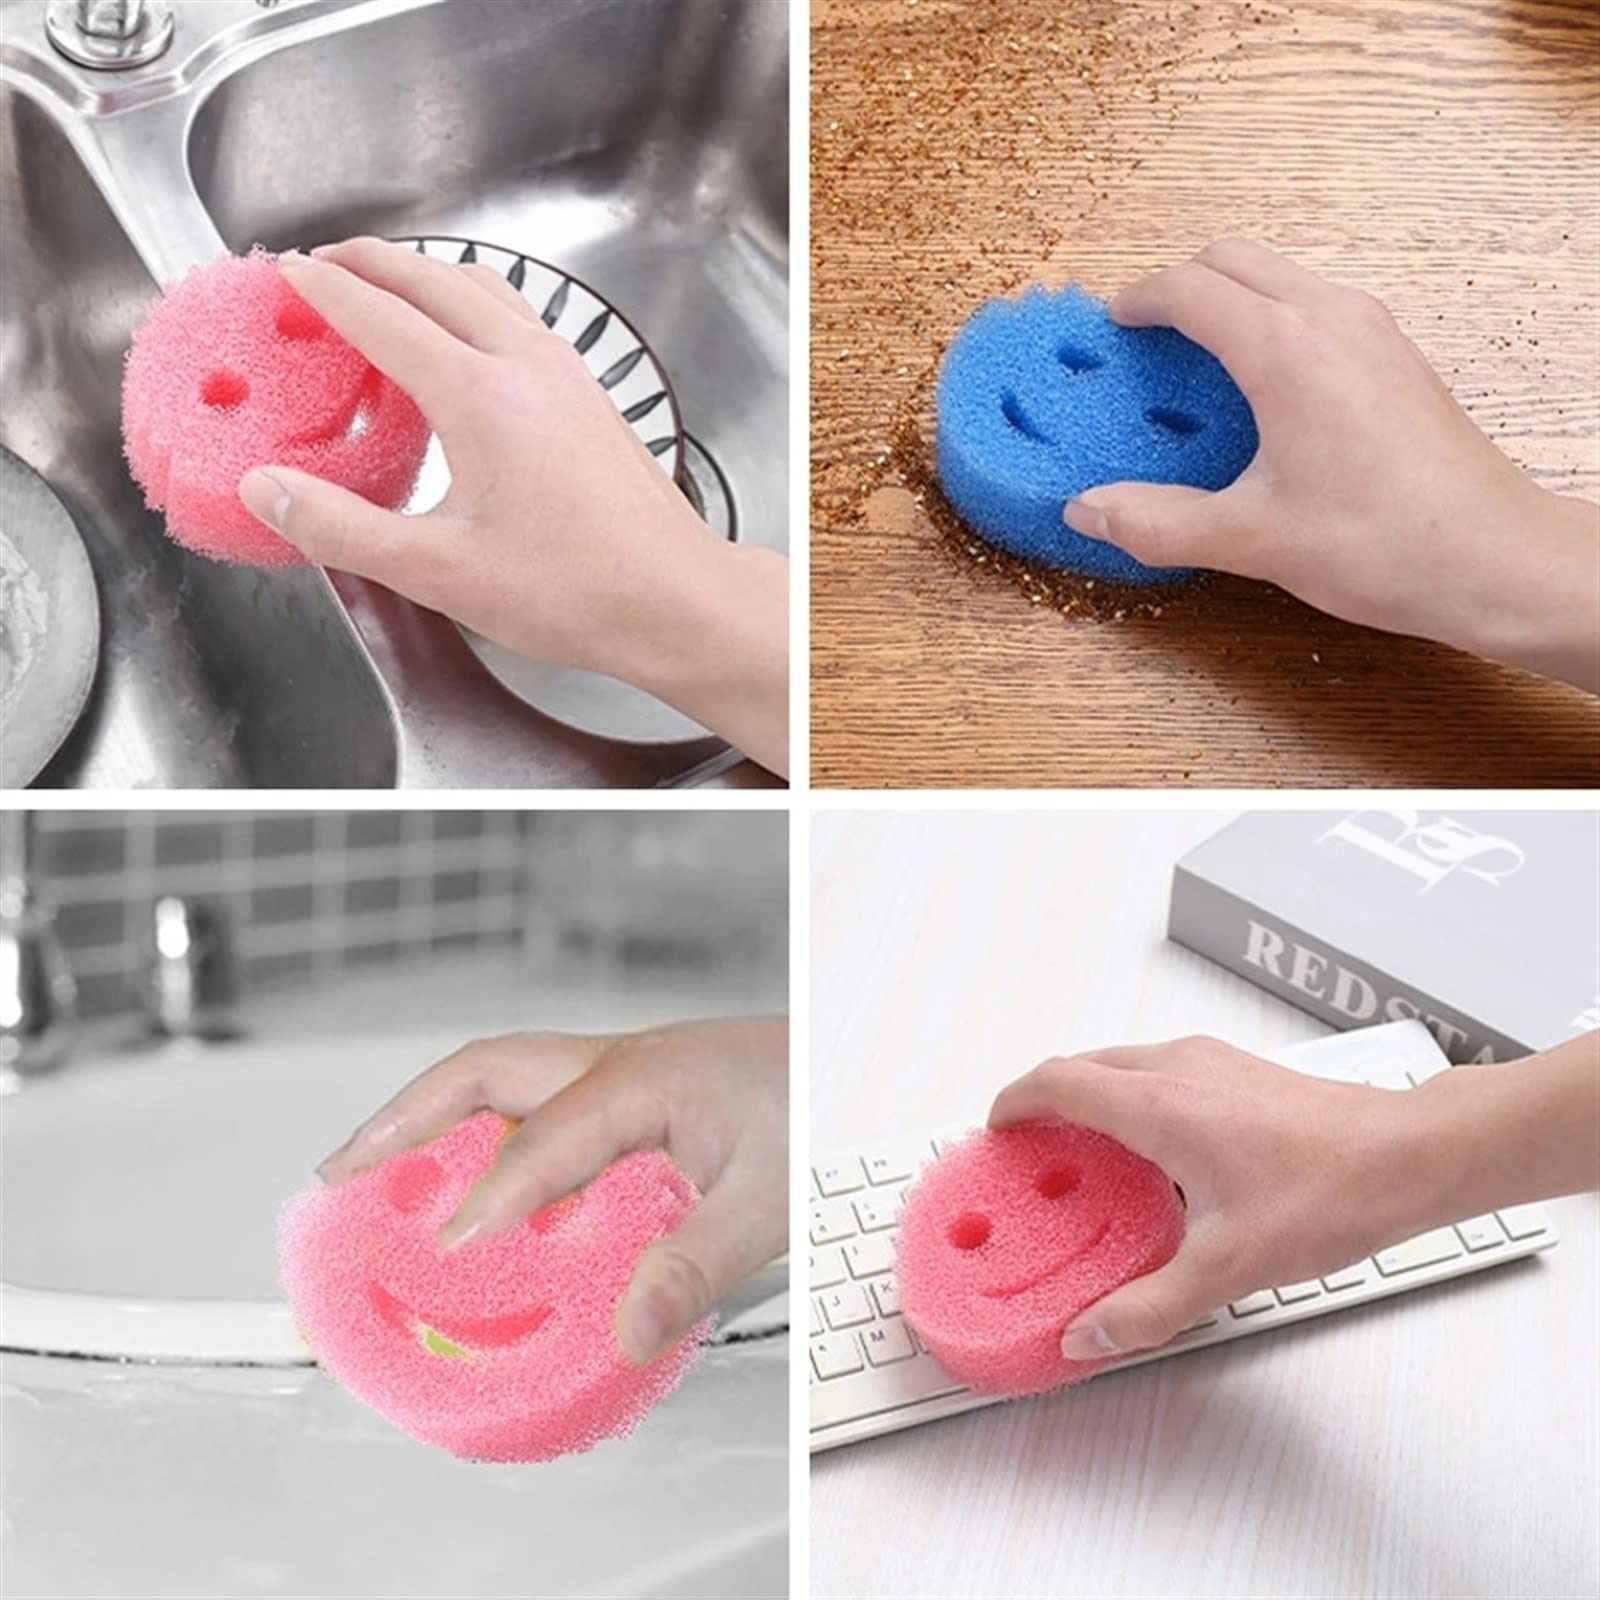 Multi-Use of Smiley Face Kitchen Scrubber.